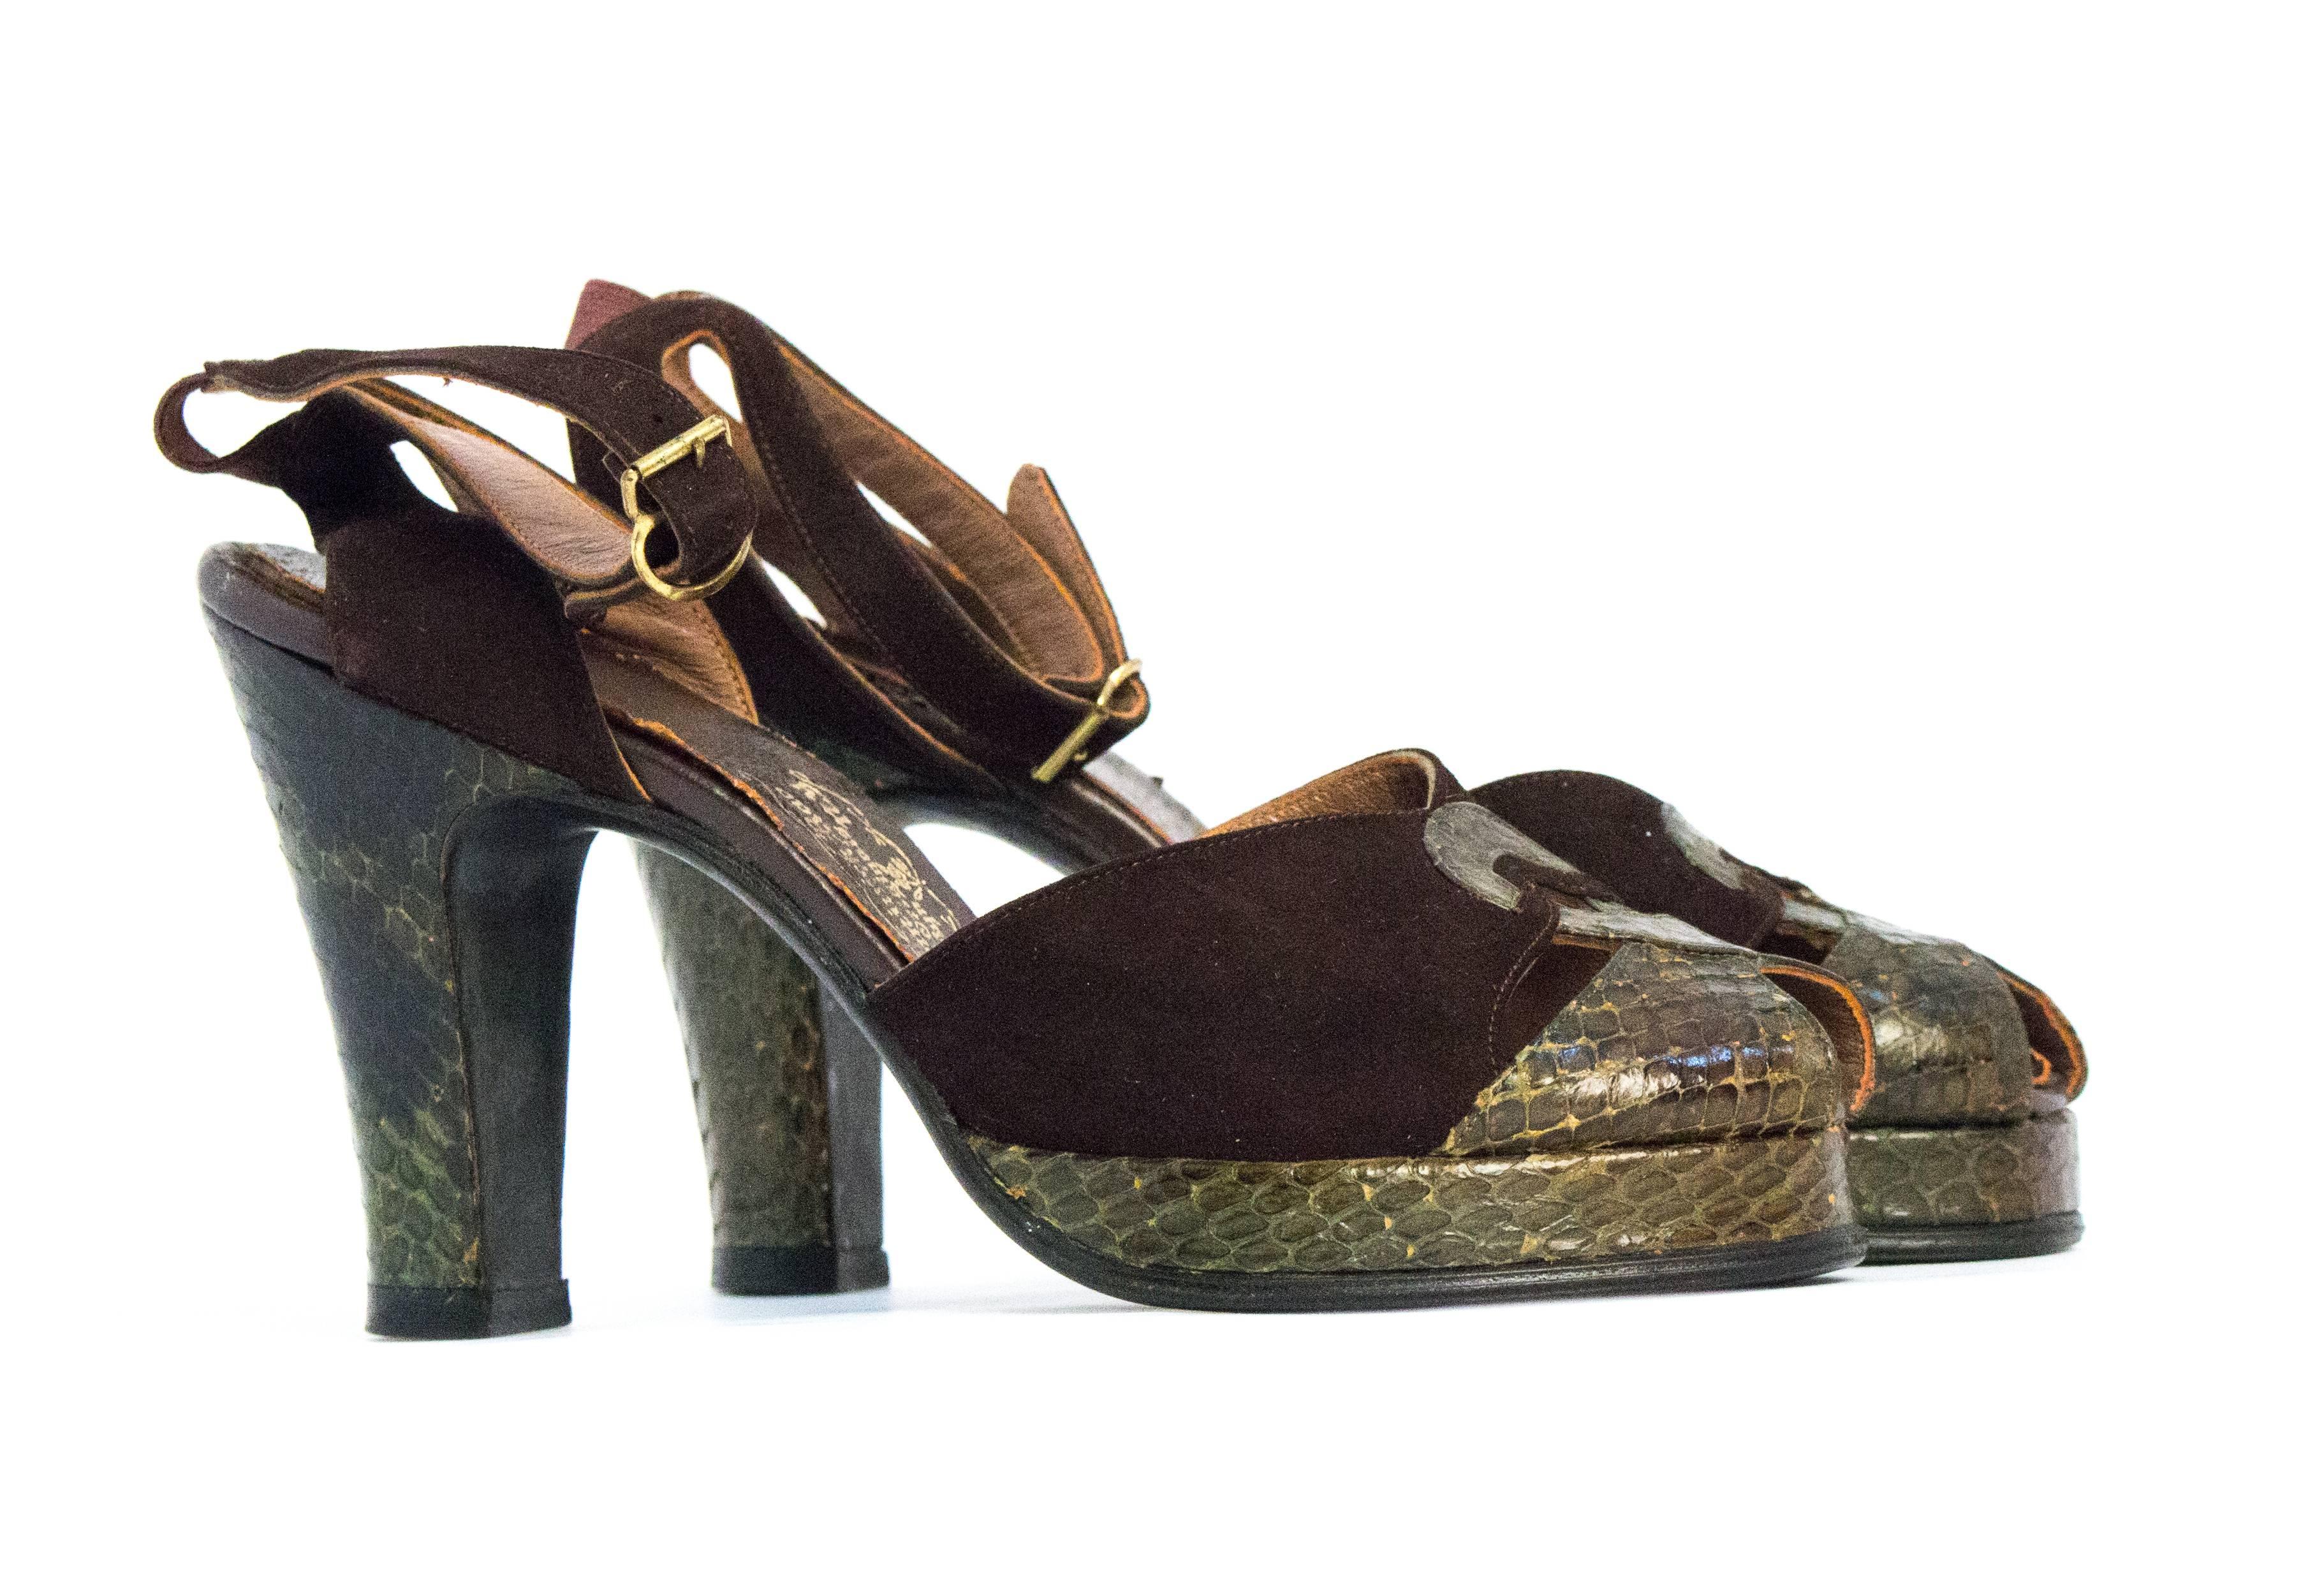 1940s green snake and brown suede platform heels. Peep-toe with elasticated ankle strap and gold toned buckle. Custom made. Aprox. US size 5.

Insole: 9